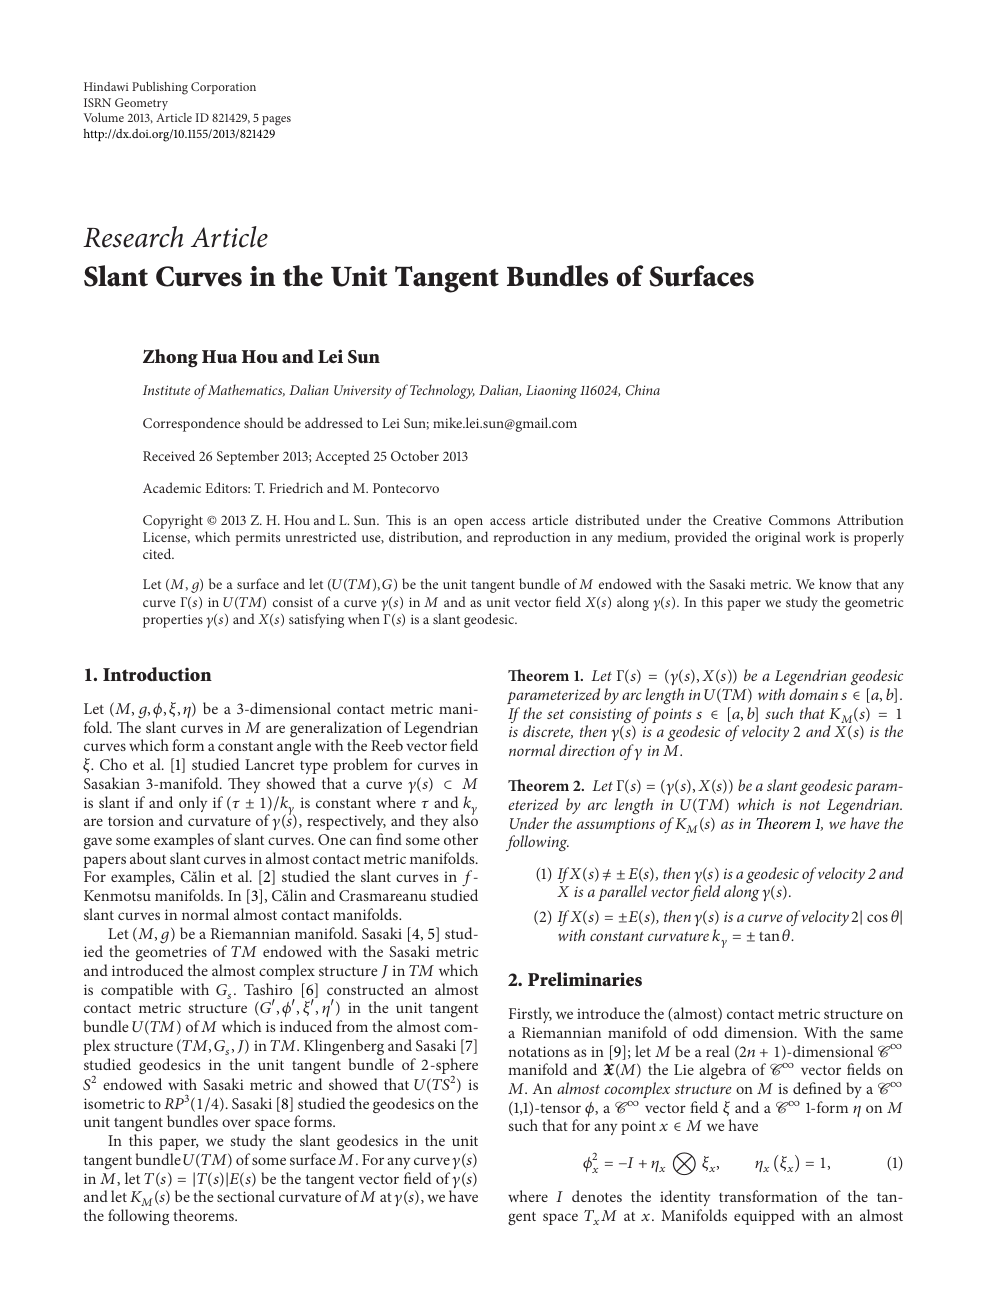 Slant Curves In The Unit Tangent Bundles Of Surfaces Topic Of Research Paper In Mathematics Download Scholarly Article Pdf And Read For Free On Cyberleninka Open Science Hub